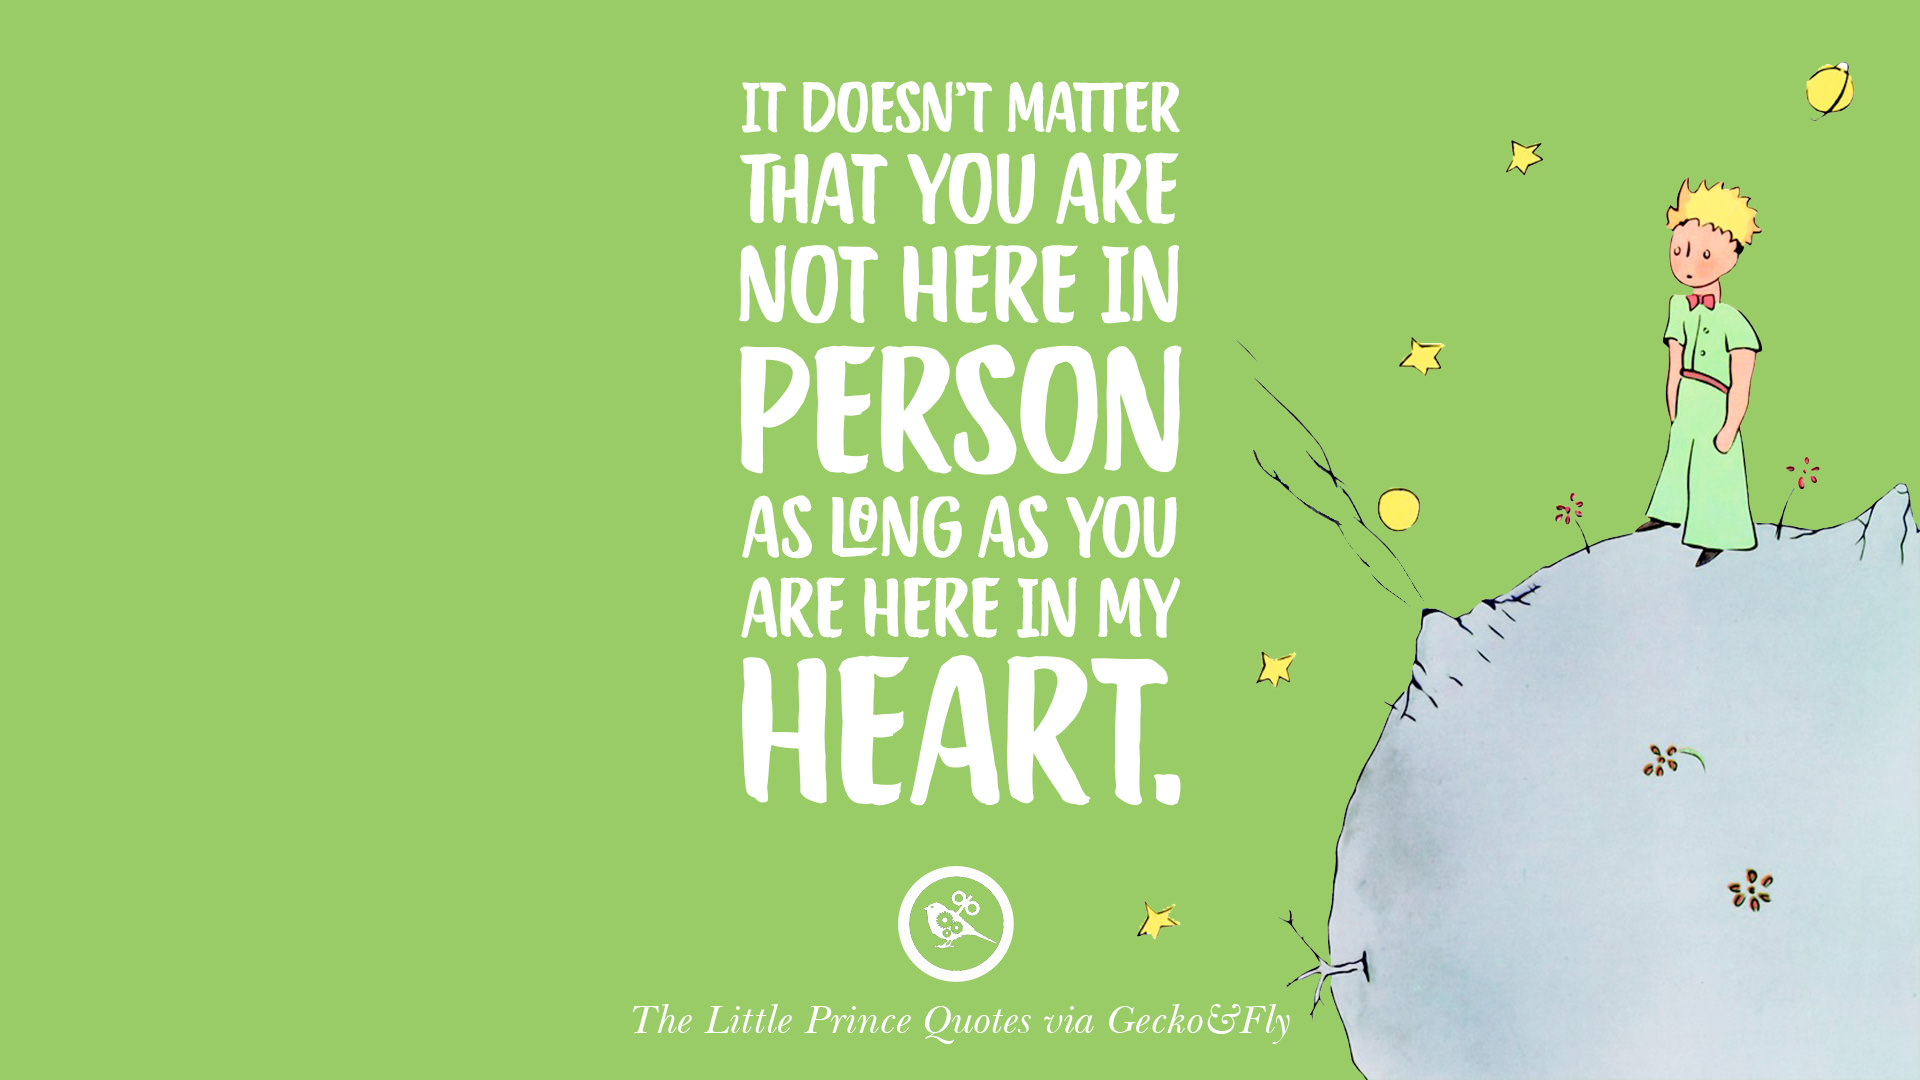 12 Quotes By The Little Prince On Life Lesson, True Love